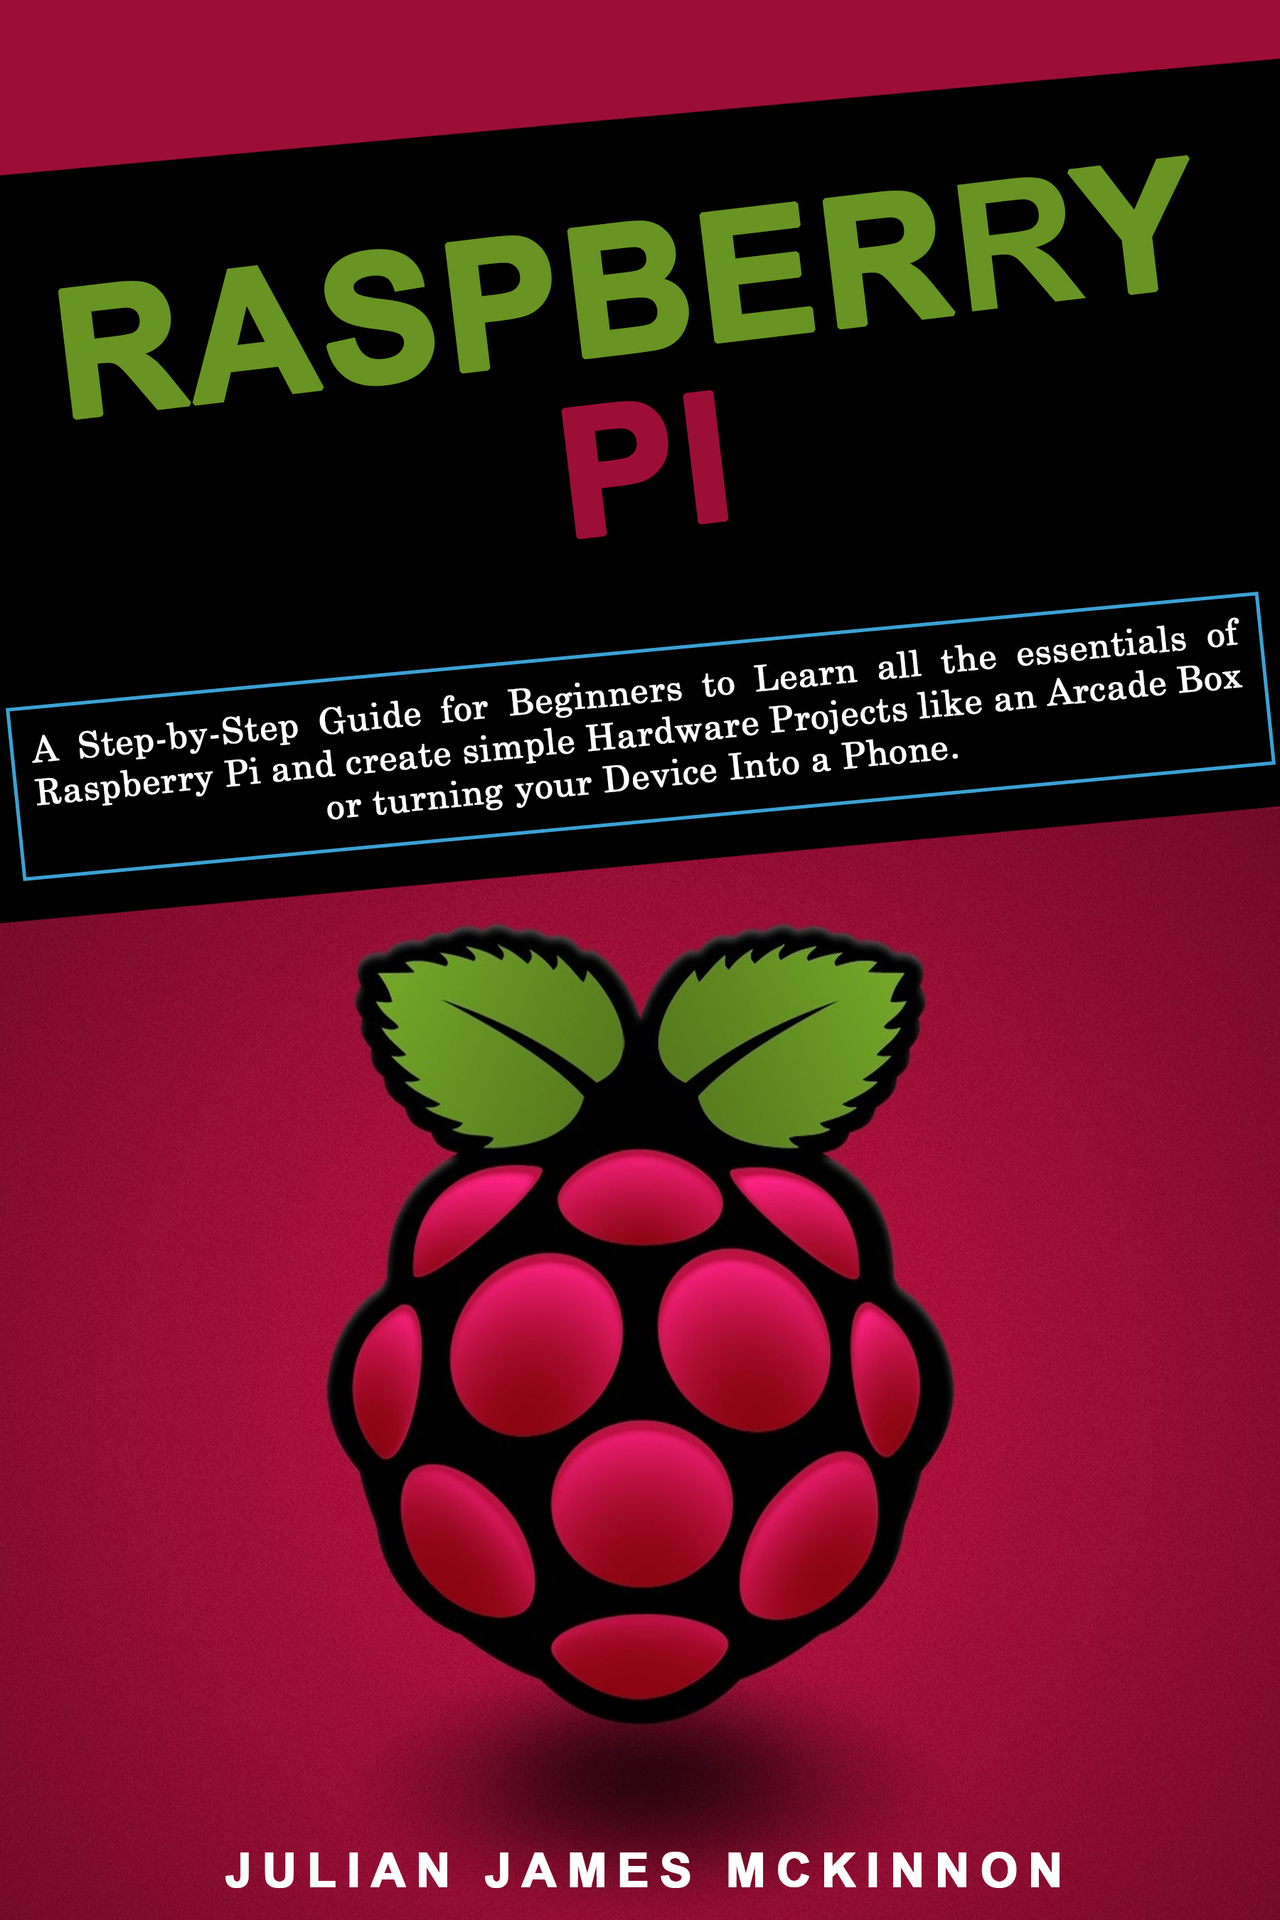 Raspberry Pi A Step-by-Step Guide for Beginners to Learn all the essentials - photo 1